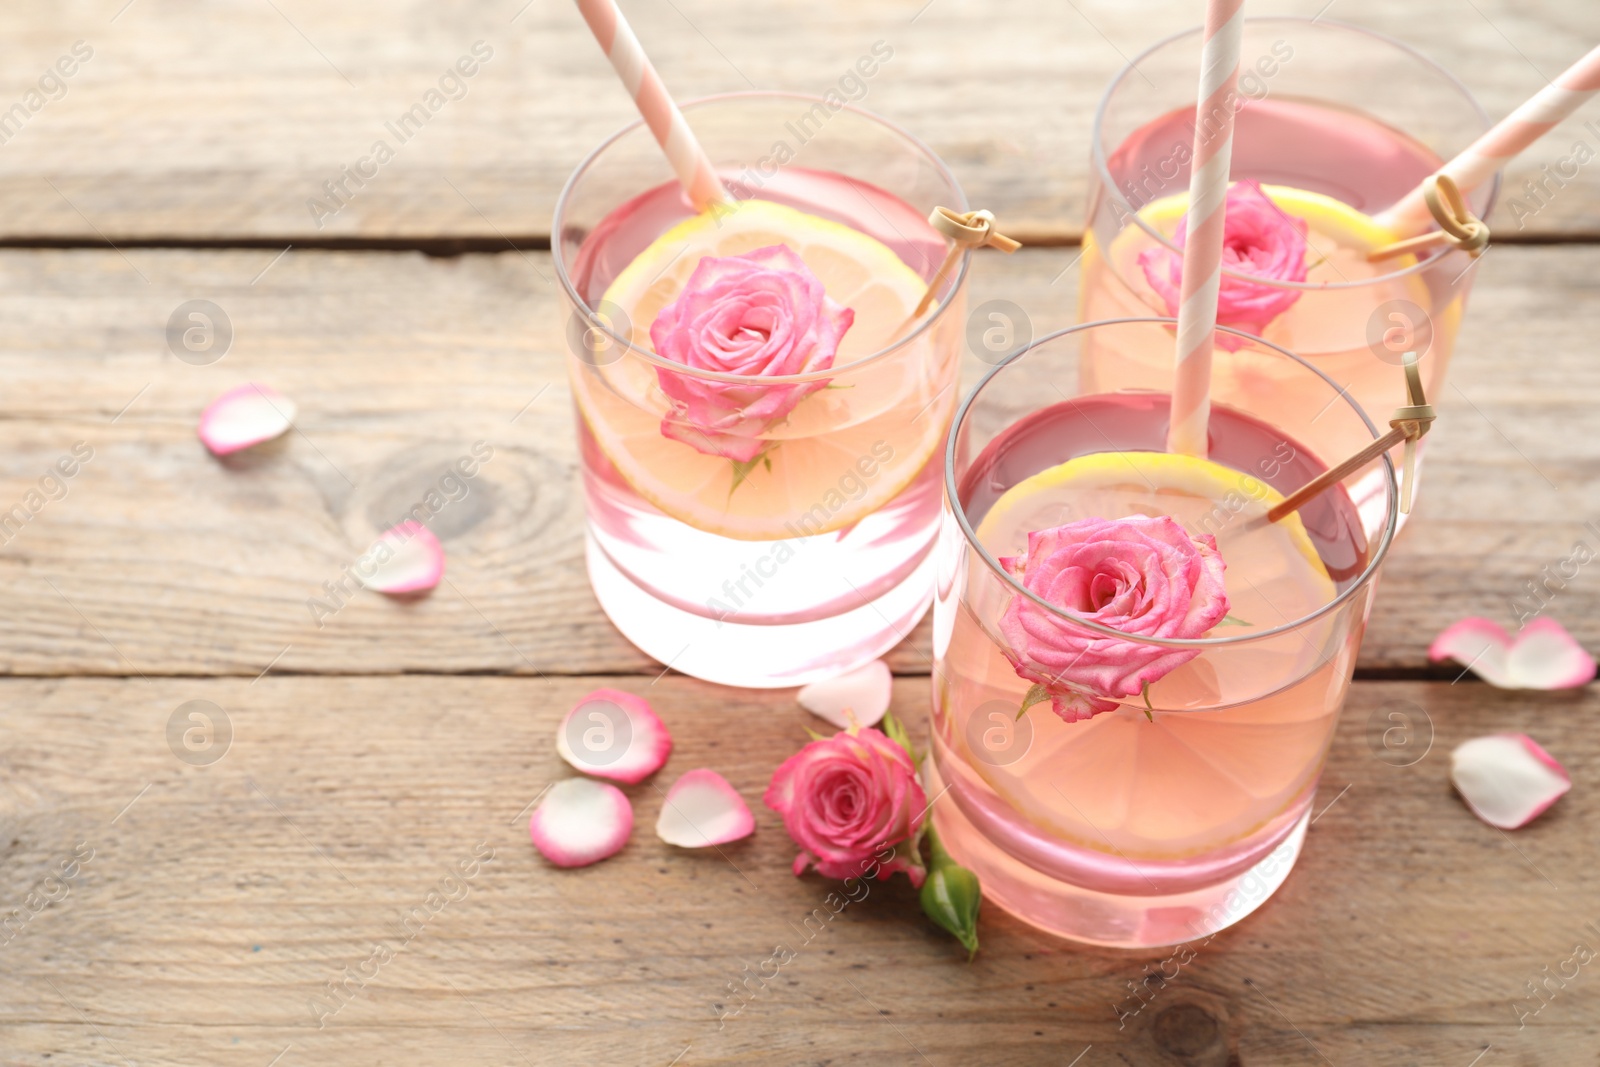 Photo of Refreshing drink with lemon and rose on wooden table